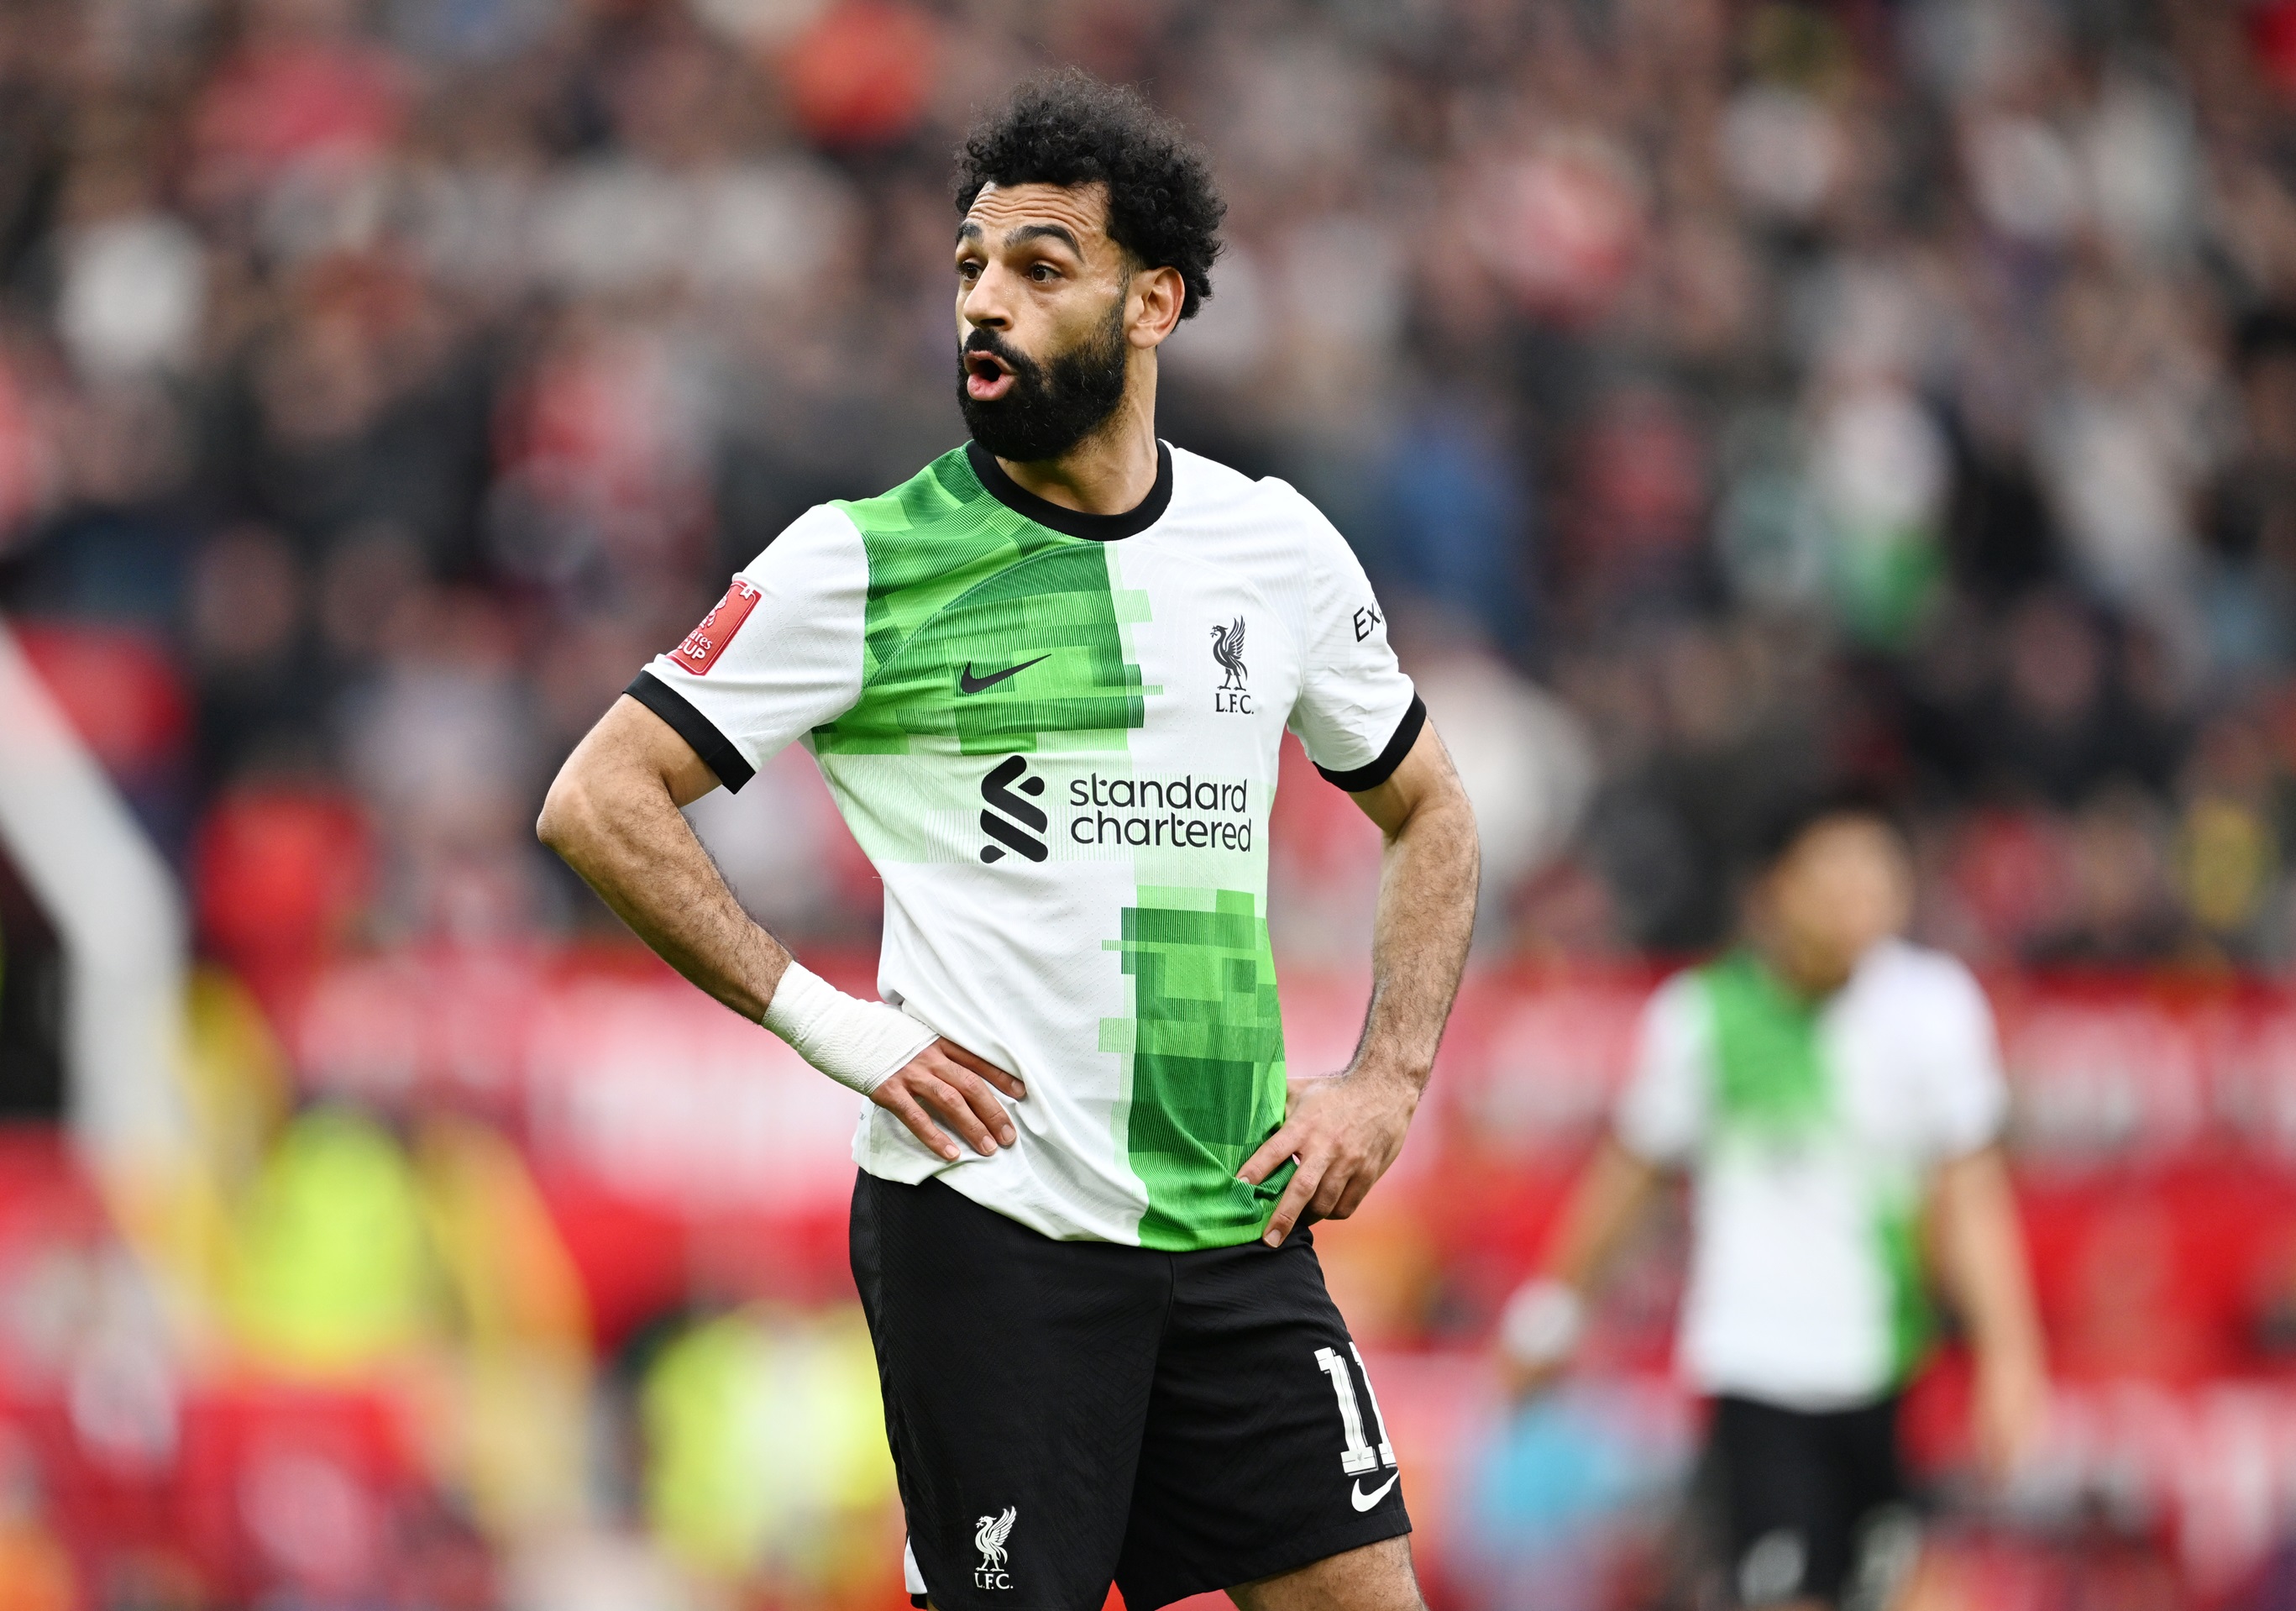 ‘The numbers I’m hearing’ – Ex-Everton chief reveals details of fresh Saudi offer for Mo Salah